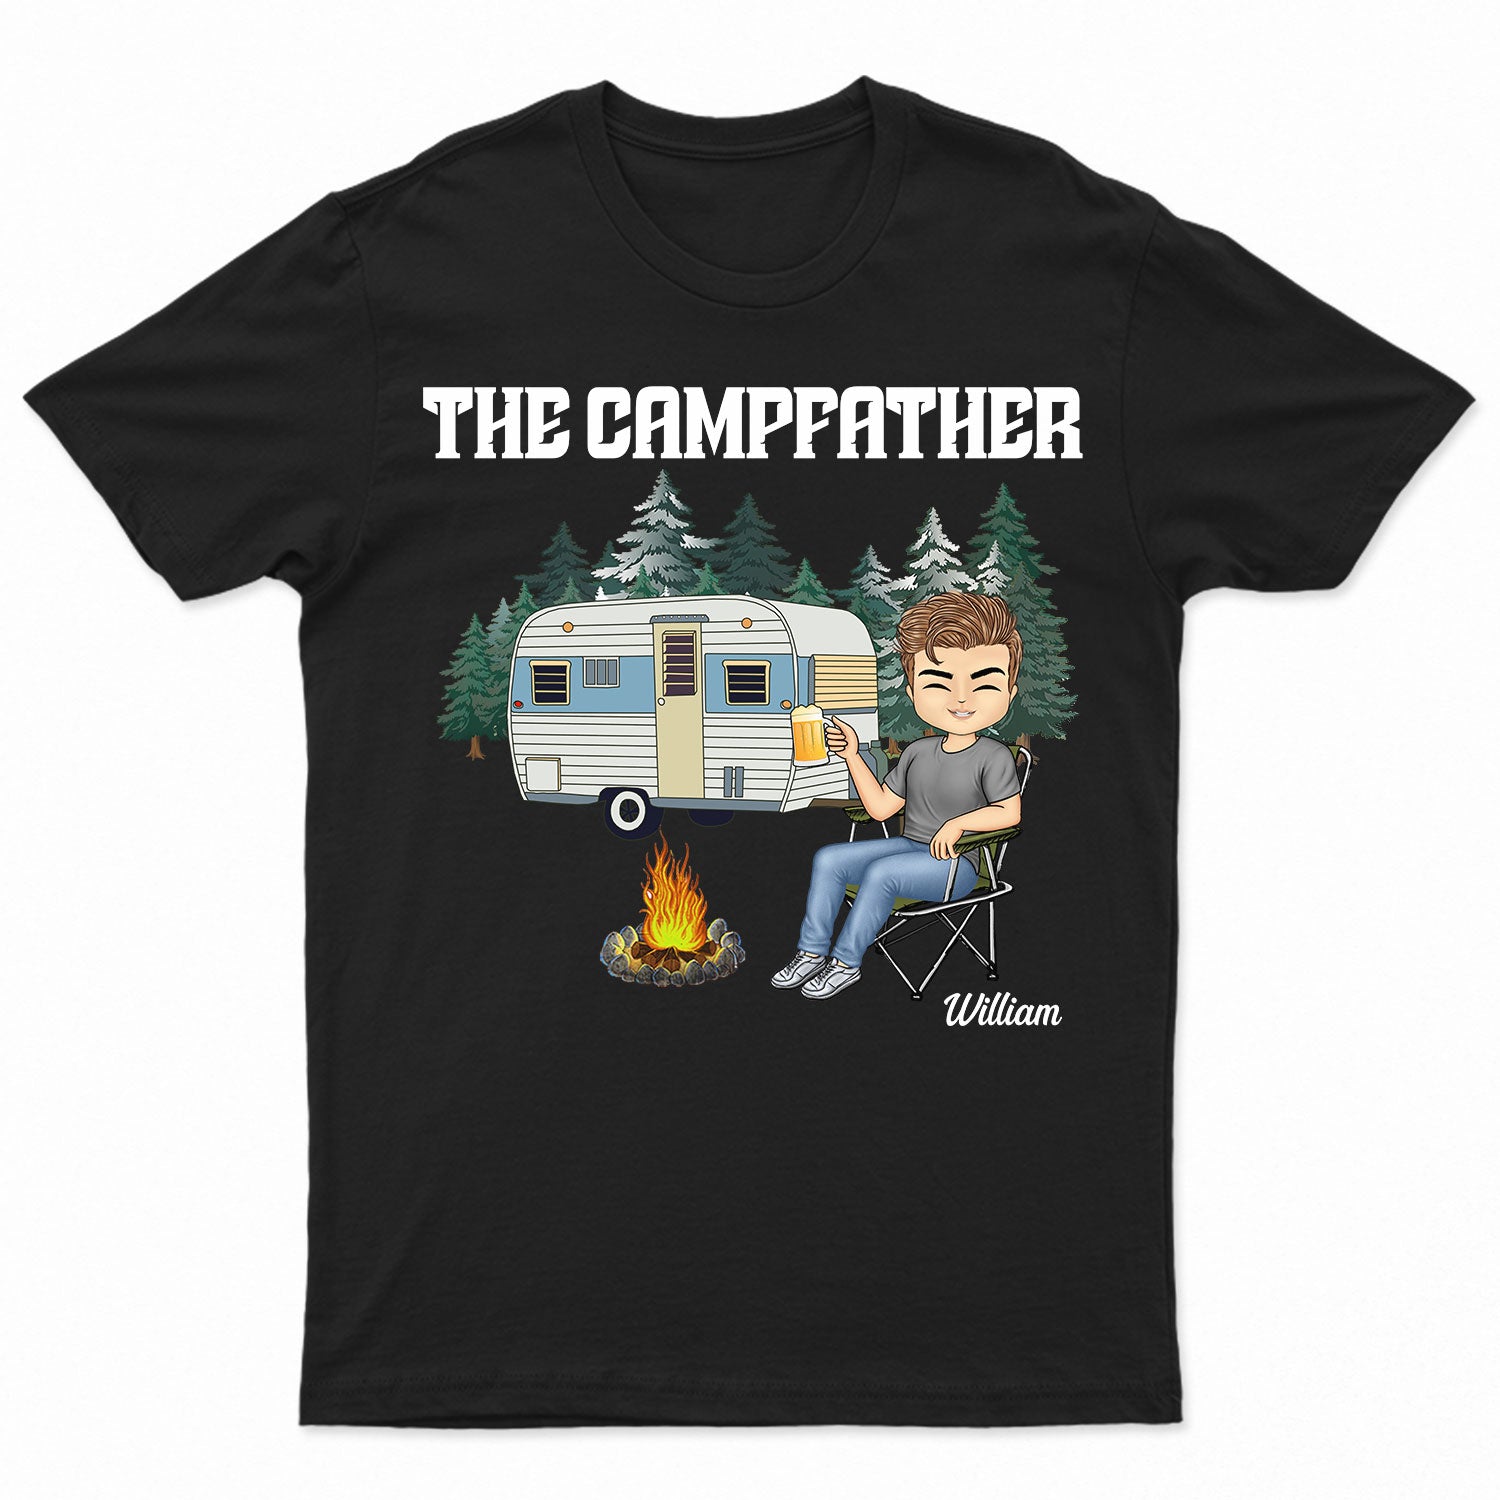 The Campfather - Gift For Camping Father - Personalized T Shirt